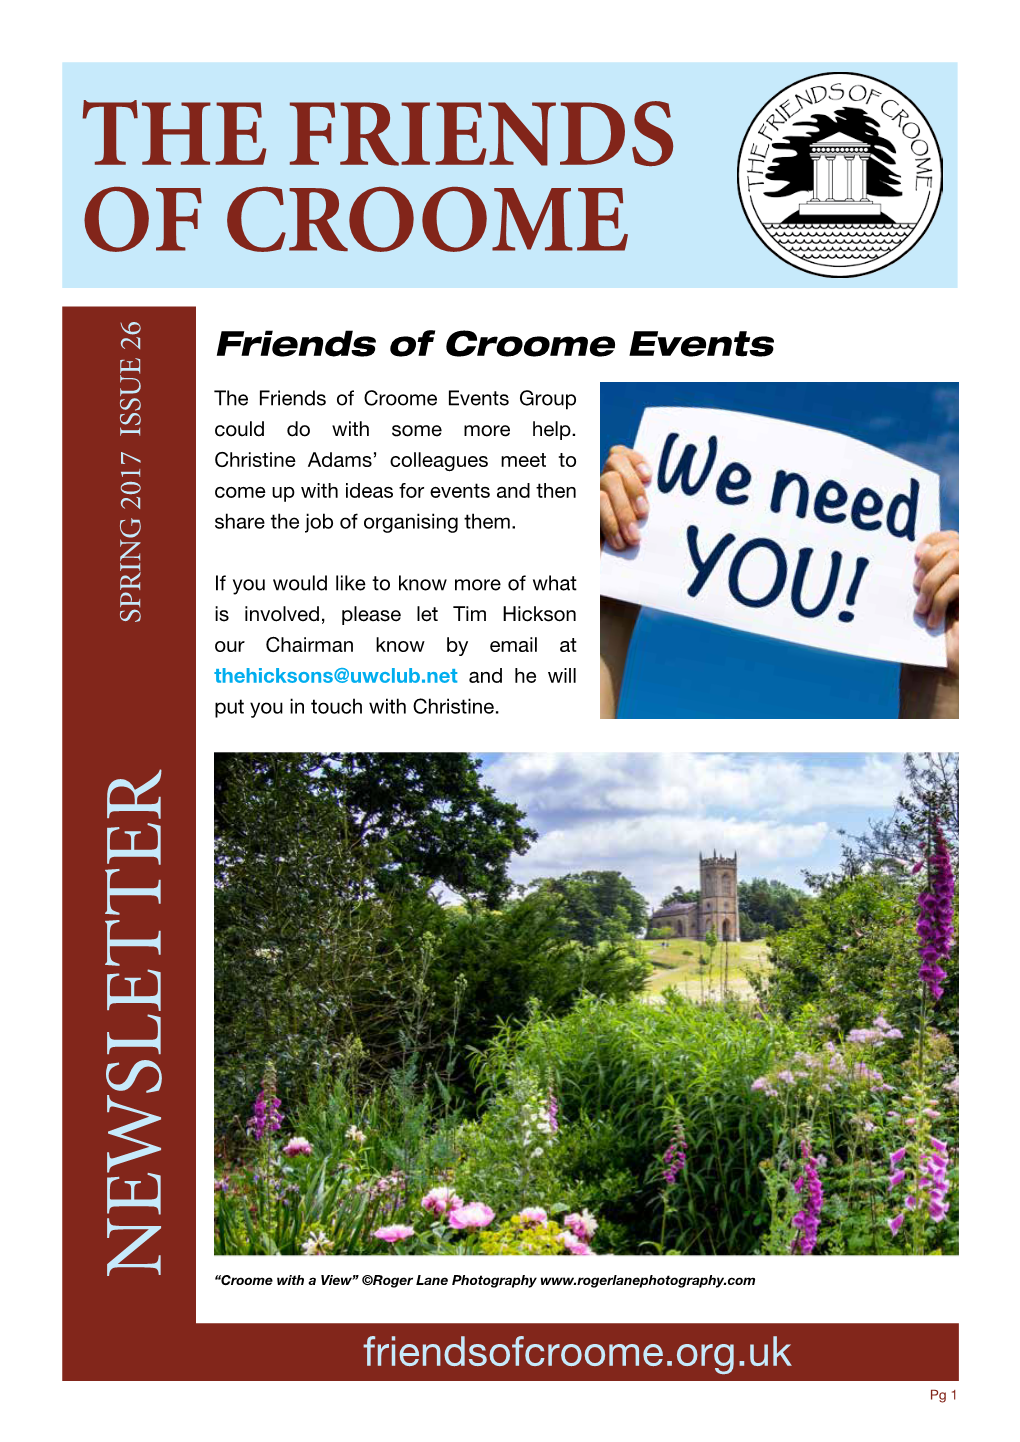 The Friends of Croome